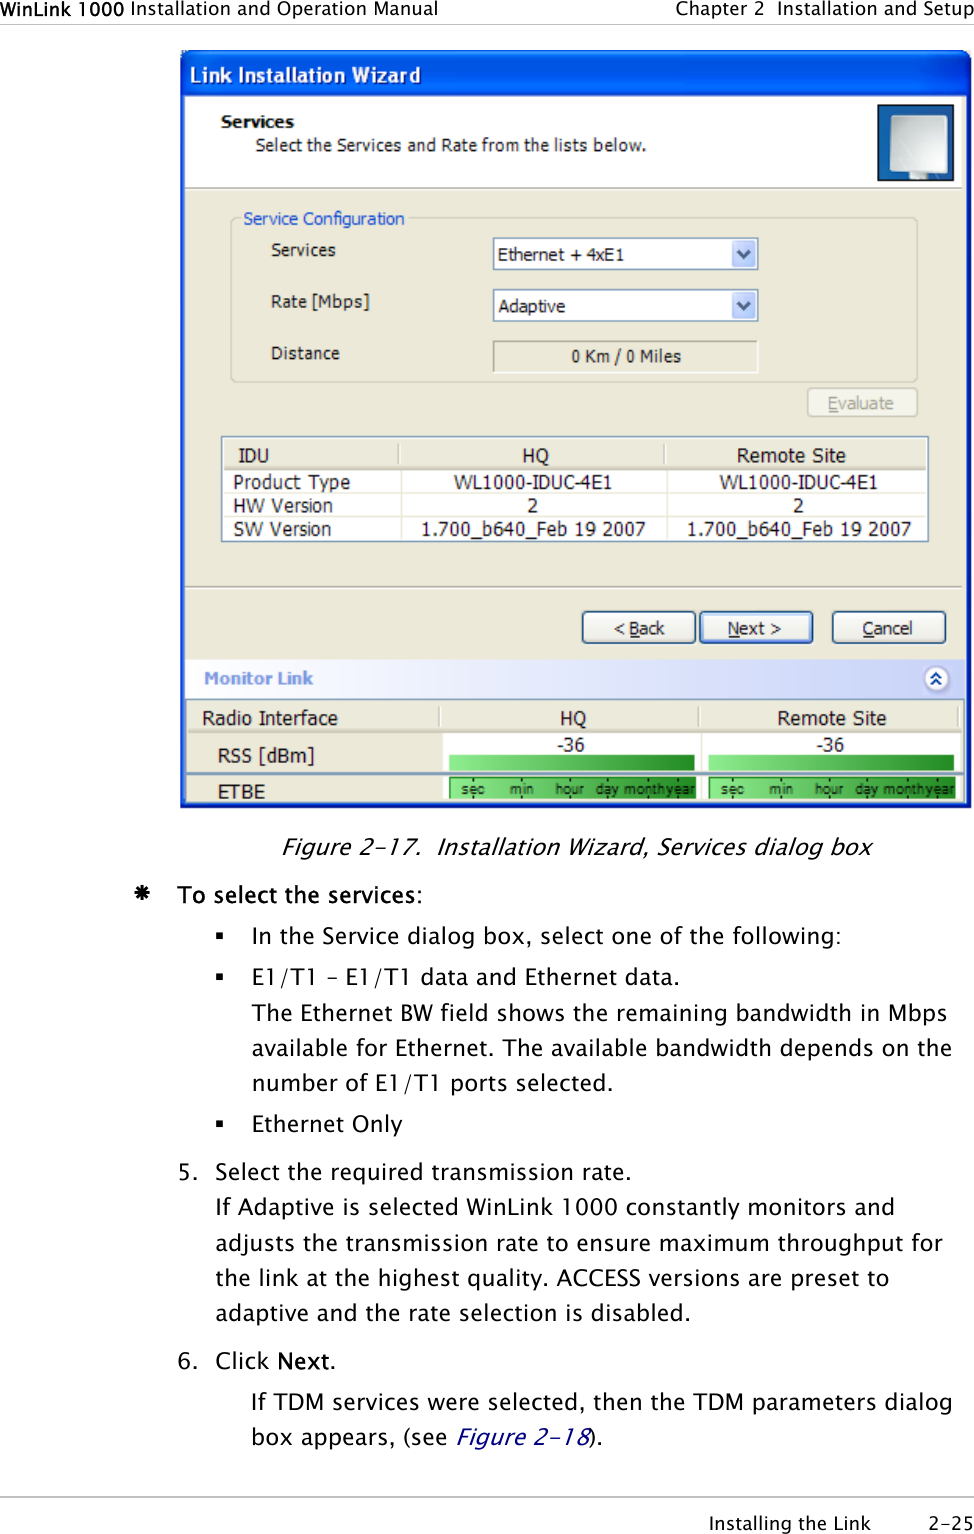 WinLink 1000 Installation and Operation Manual  Chapter  2  Installation and Setup  Figure  2-17.  Installation Wizard, Services dialog box Æ To select the services:  In the Service dialog box, select one of the following:  E1/T1 – E1/T1 data and Ethernet data. The Ethernet BW field shows the remaining bandwidth in Mbps available for Ethernet. The available bandwidth depends on the number of E1/T1 ports selected.  Ethernet Only 5. Select the required transmission rate. If Adaptive is selected WinLink 1000 constantly monitors and adjusts the transmission rate to ensure maximum throughput for the link at the highest quality. ACCESS versions are preset to adaptive and the rate selection is disabled. 6. Click Next. If TDM services were selected, then the TDM parameters dialog box appears, (see Figure  2-18).  Installing the Link  2-25 